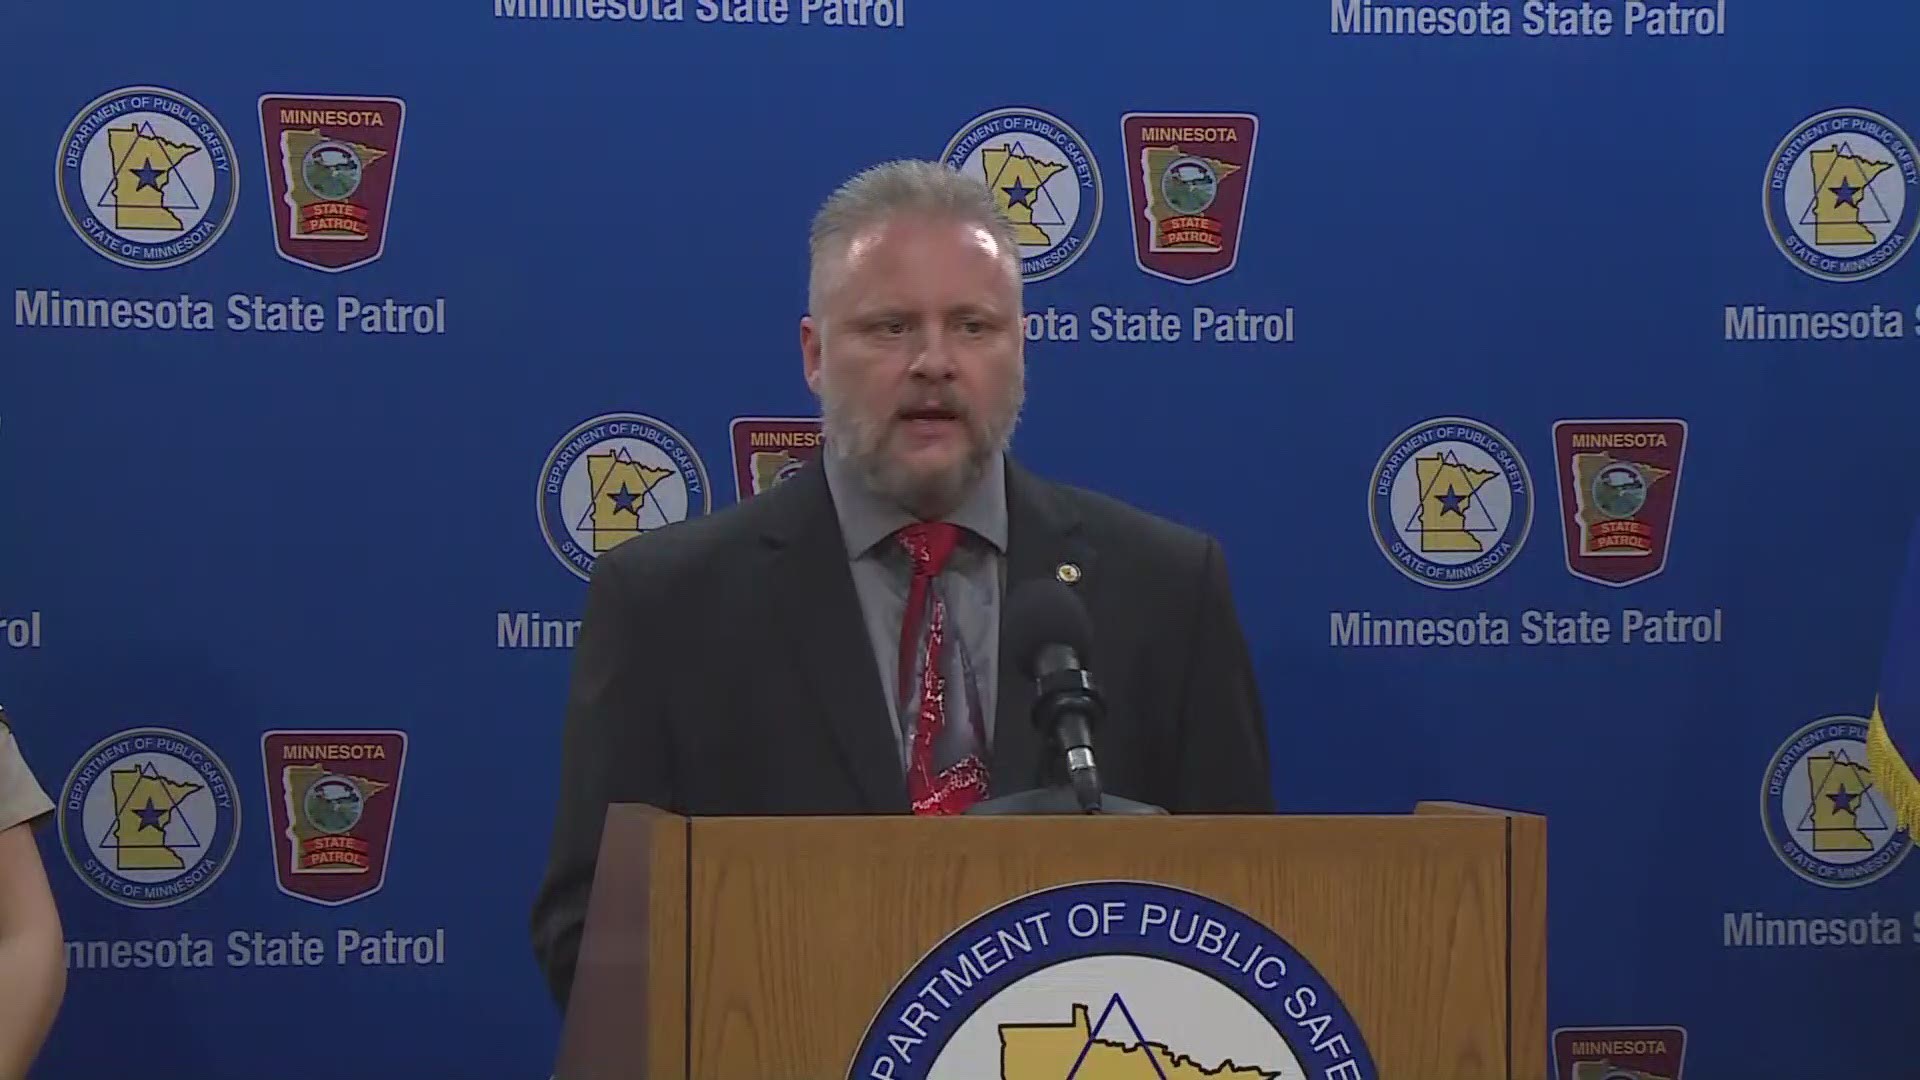 Eastbound I-94 has reopened between Rogers and Maple Grove after a delivery truck crossed the median Wednesday morning, killing one person and badly injuring another. DPS held a news conference on Wednesday. https://kare11.tv/2P9tk69